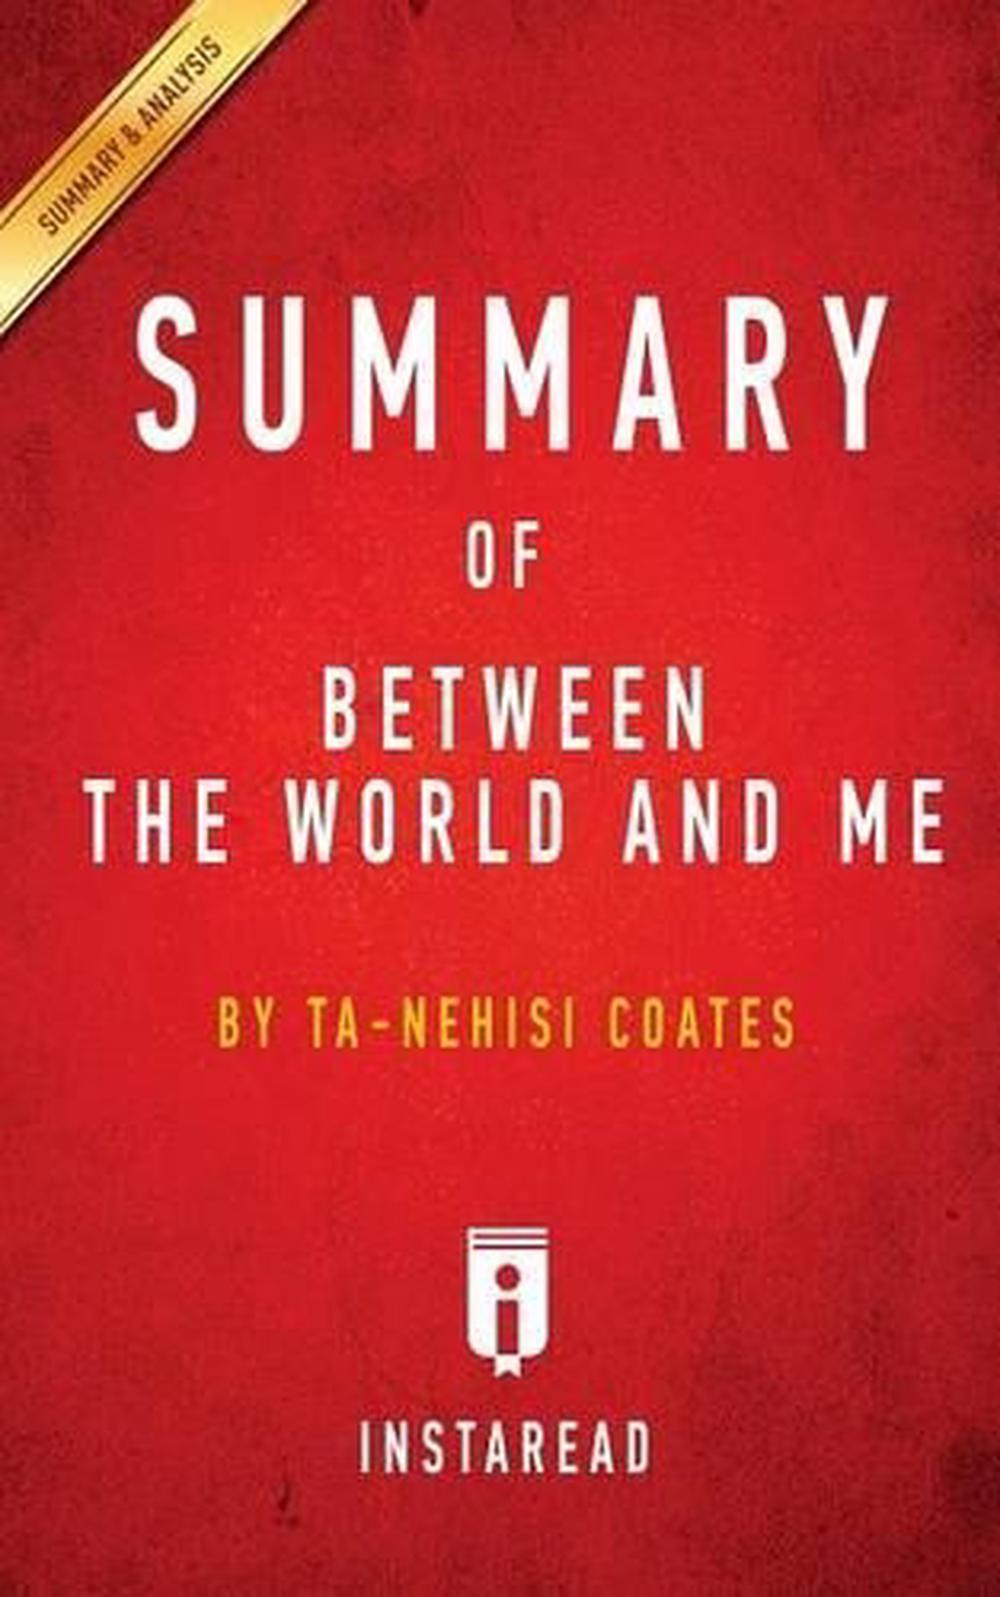 between the world and me by ta nehisi coates